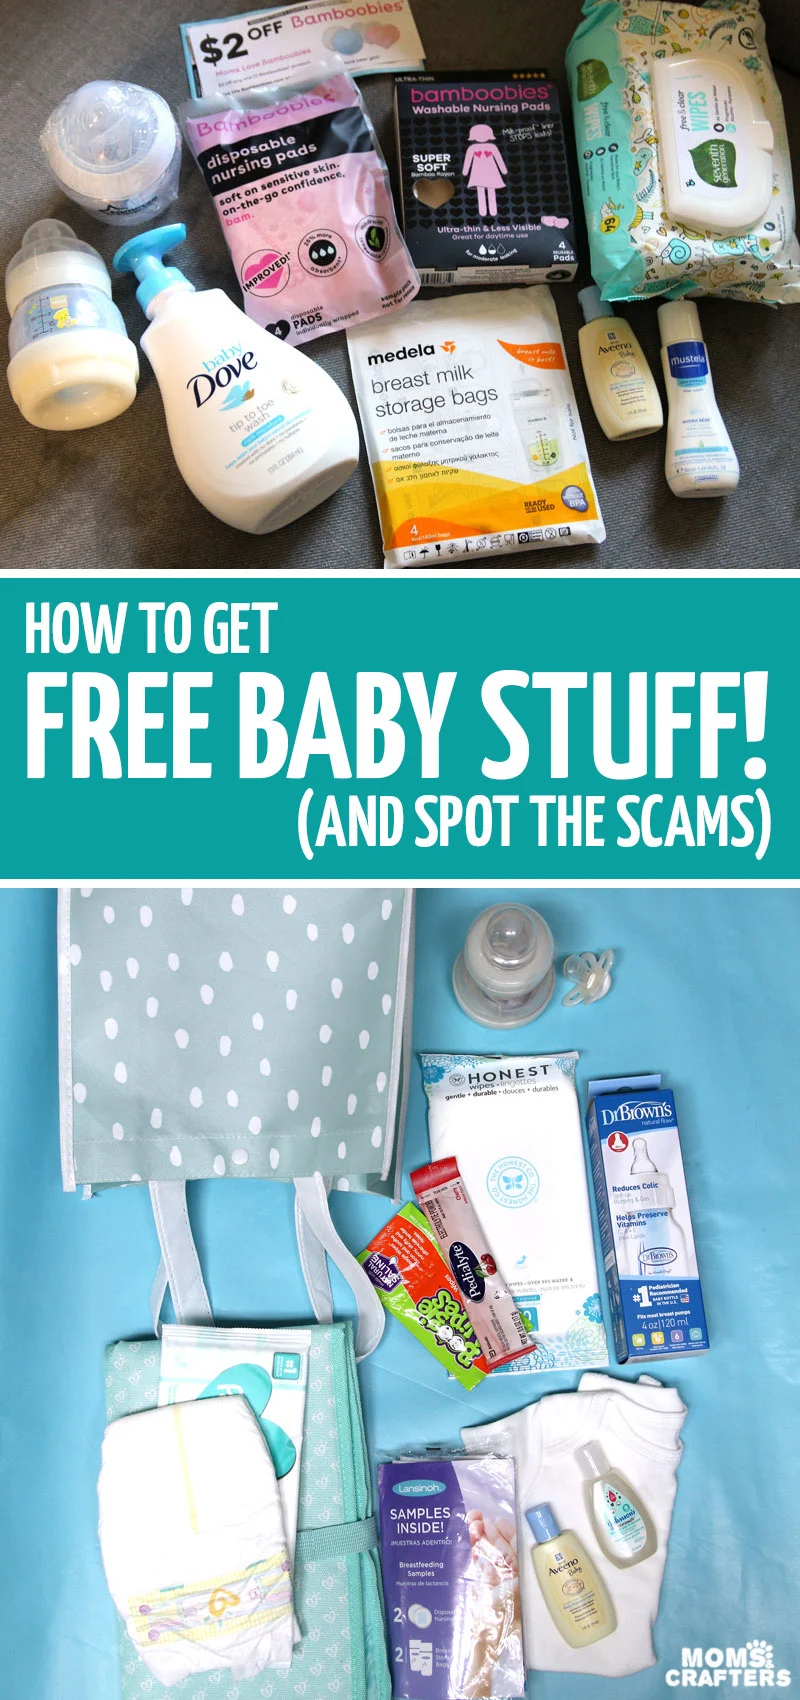 Free stuff for moms and babies